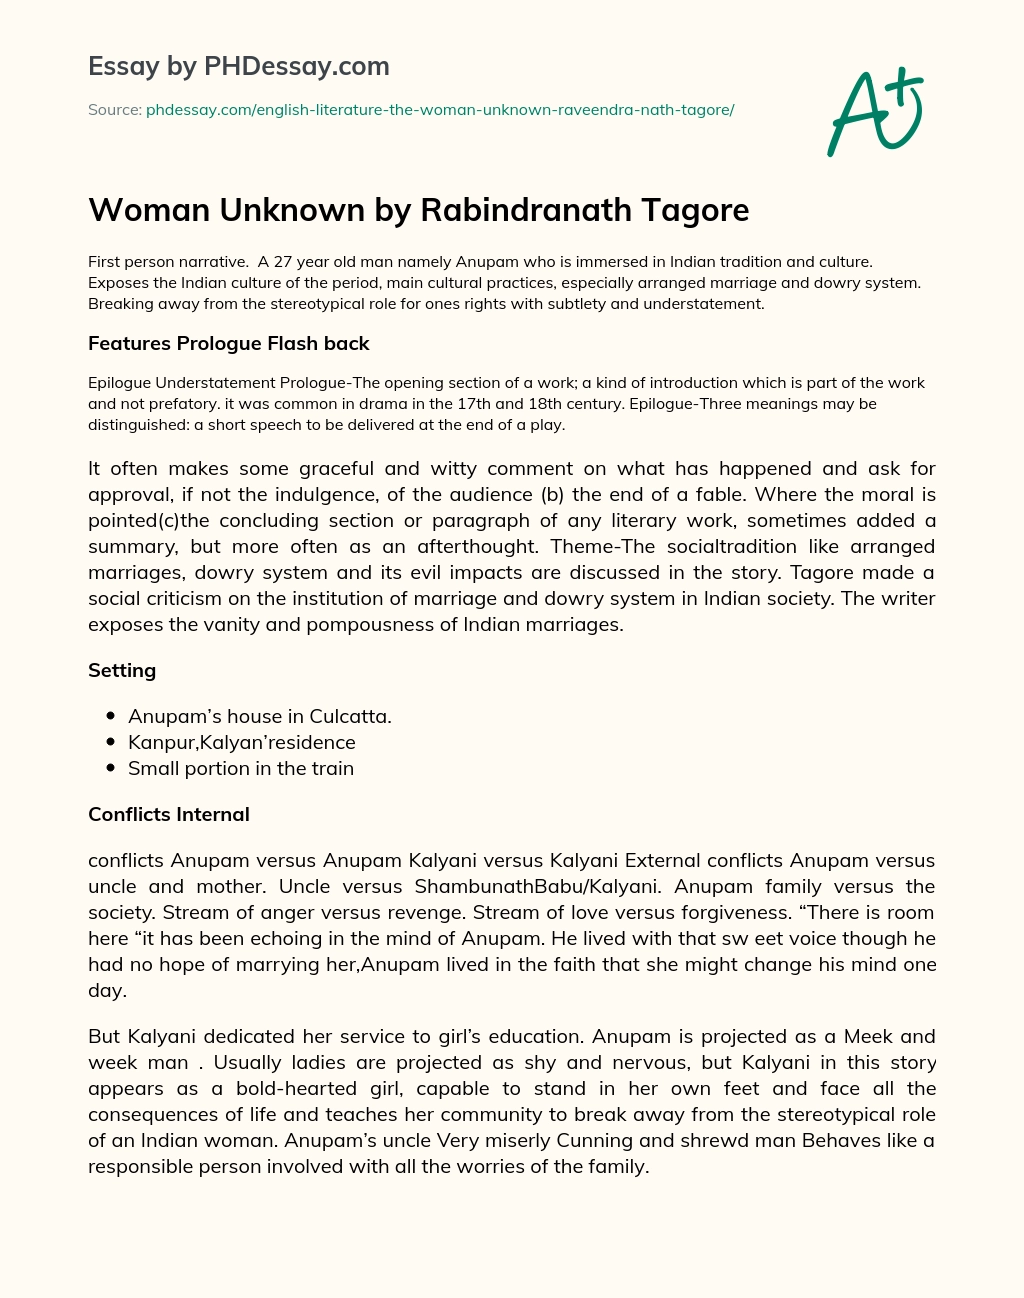 Woman Unknown by Rabindranath Tagore essay